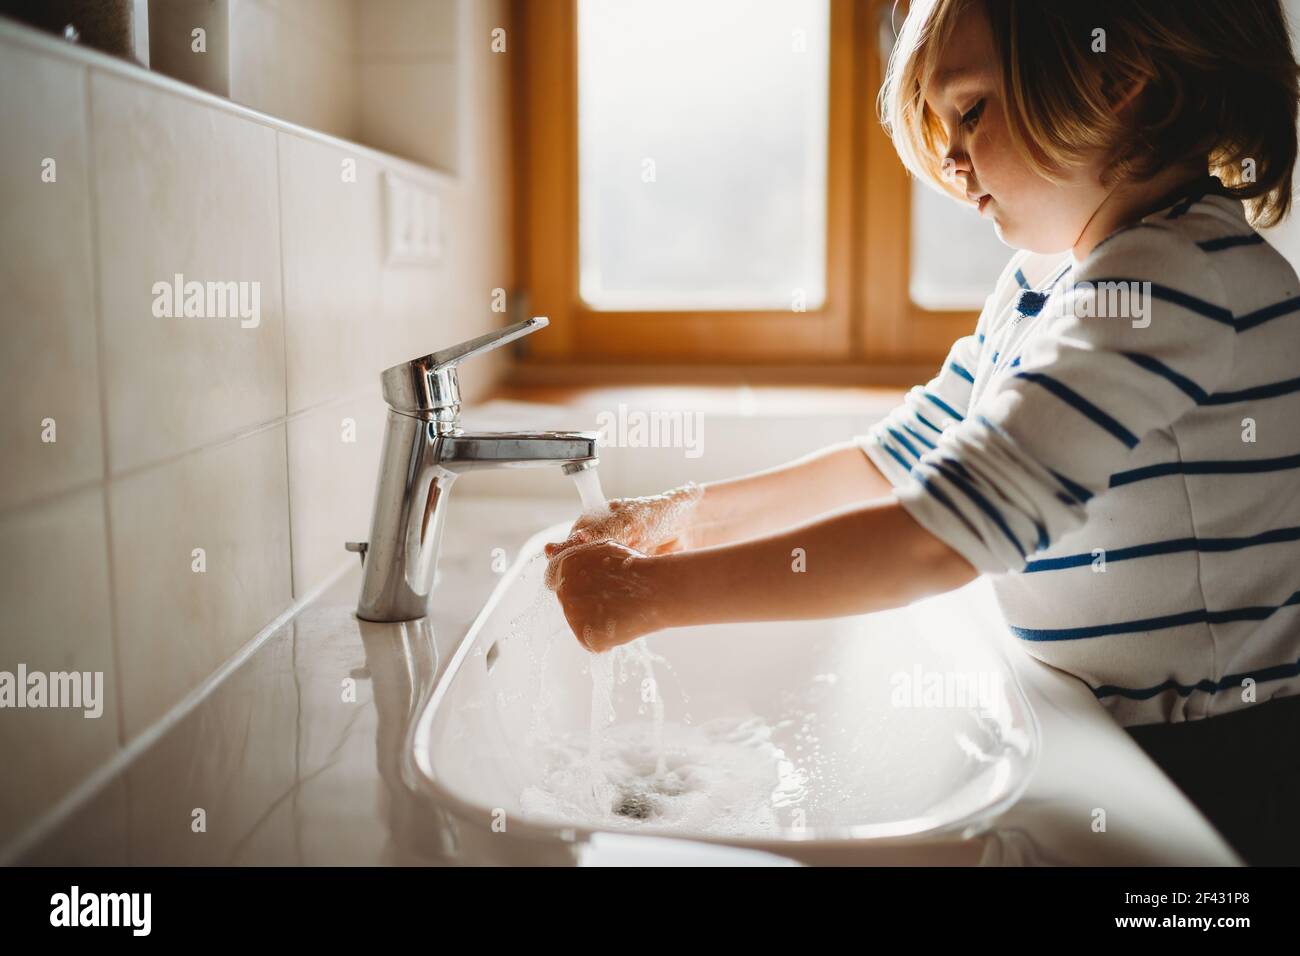 Side view of young preschool aged child washing hands with soap Stock Photo